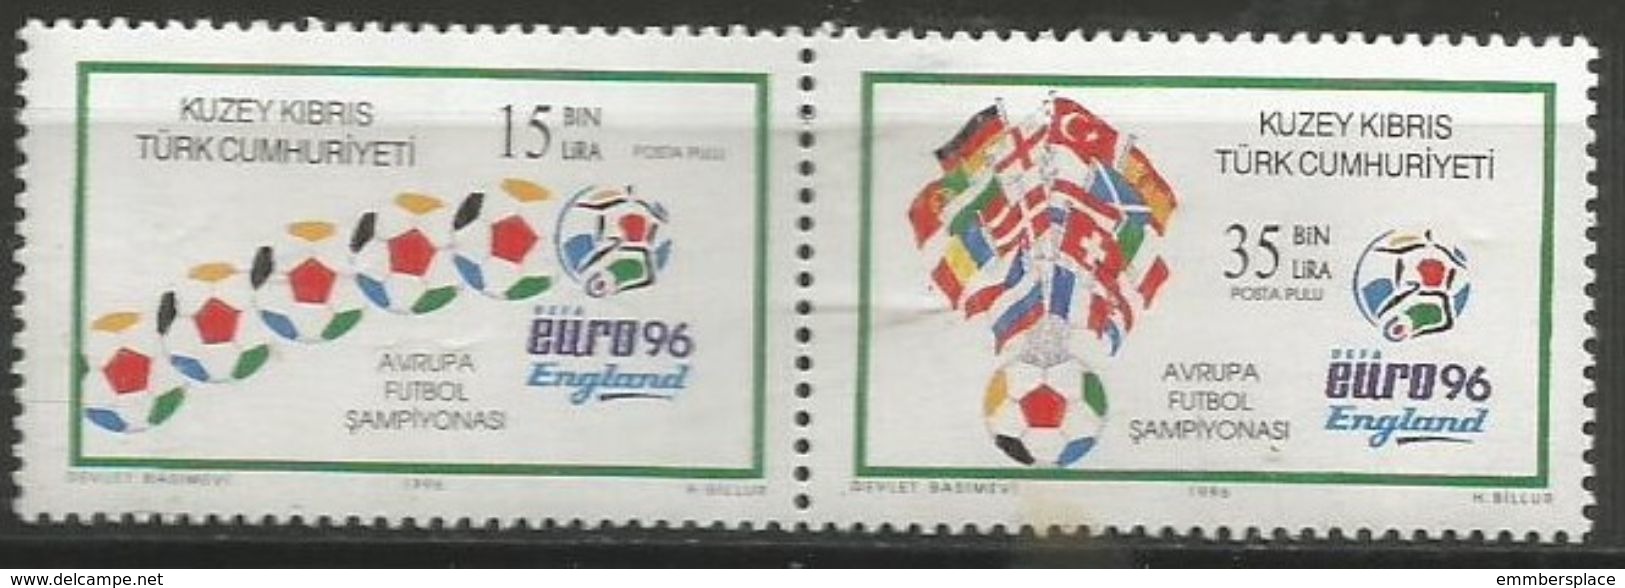 Cyprus (Turkish) - 1996 European Soccer Championship Pair MNH **  SG 430a   Sc 422a - Unused Stamps